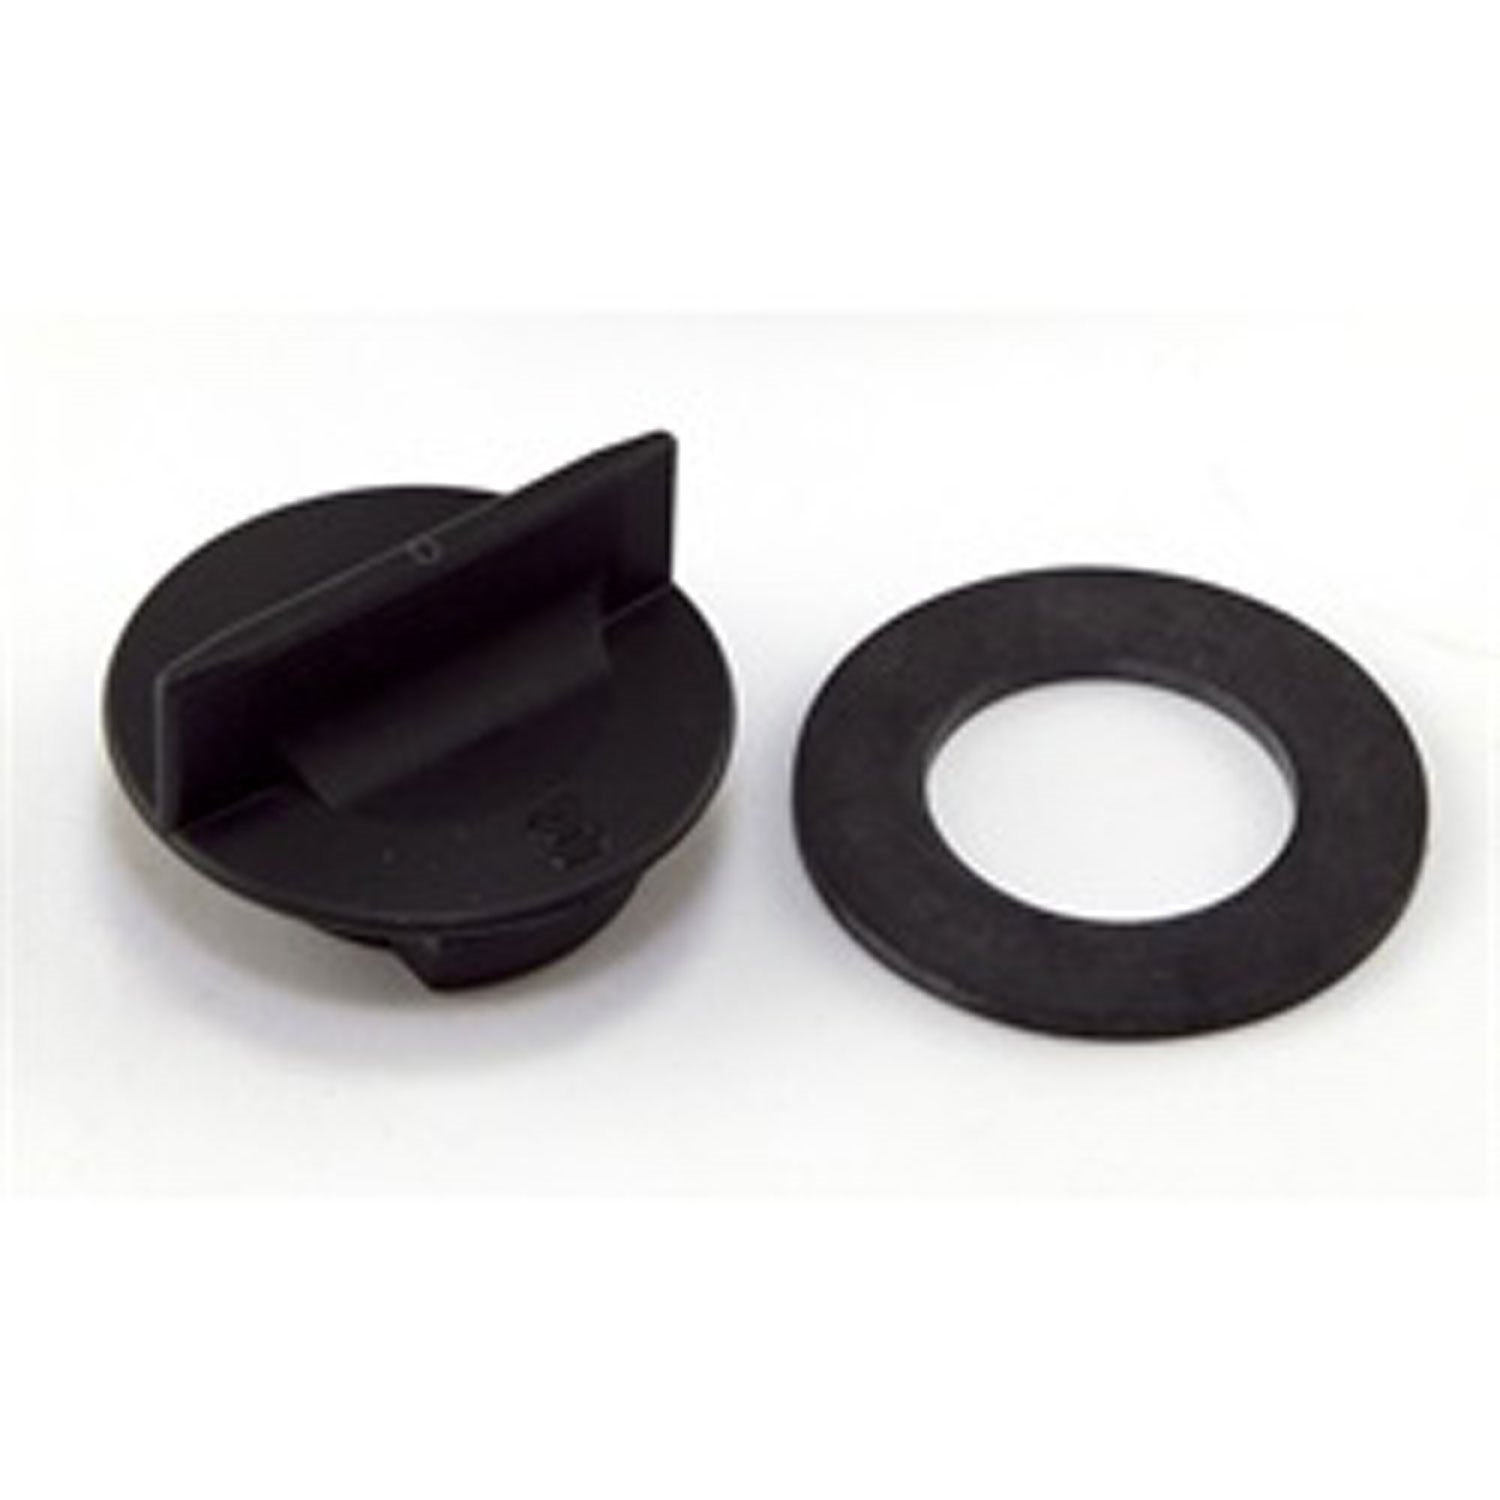 Oil Fill Cap for 1981-1990 Jeep Models with 2.5L, 4.0L or 4.2L Engines